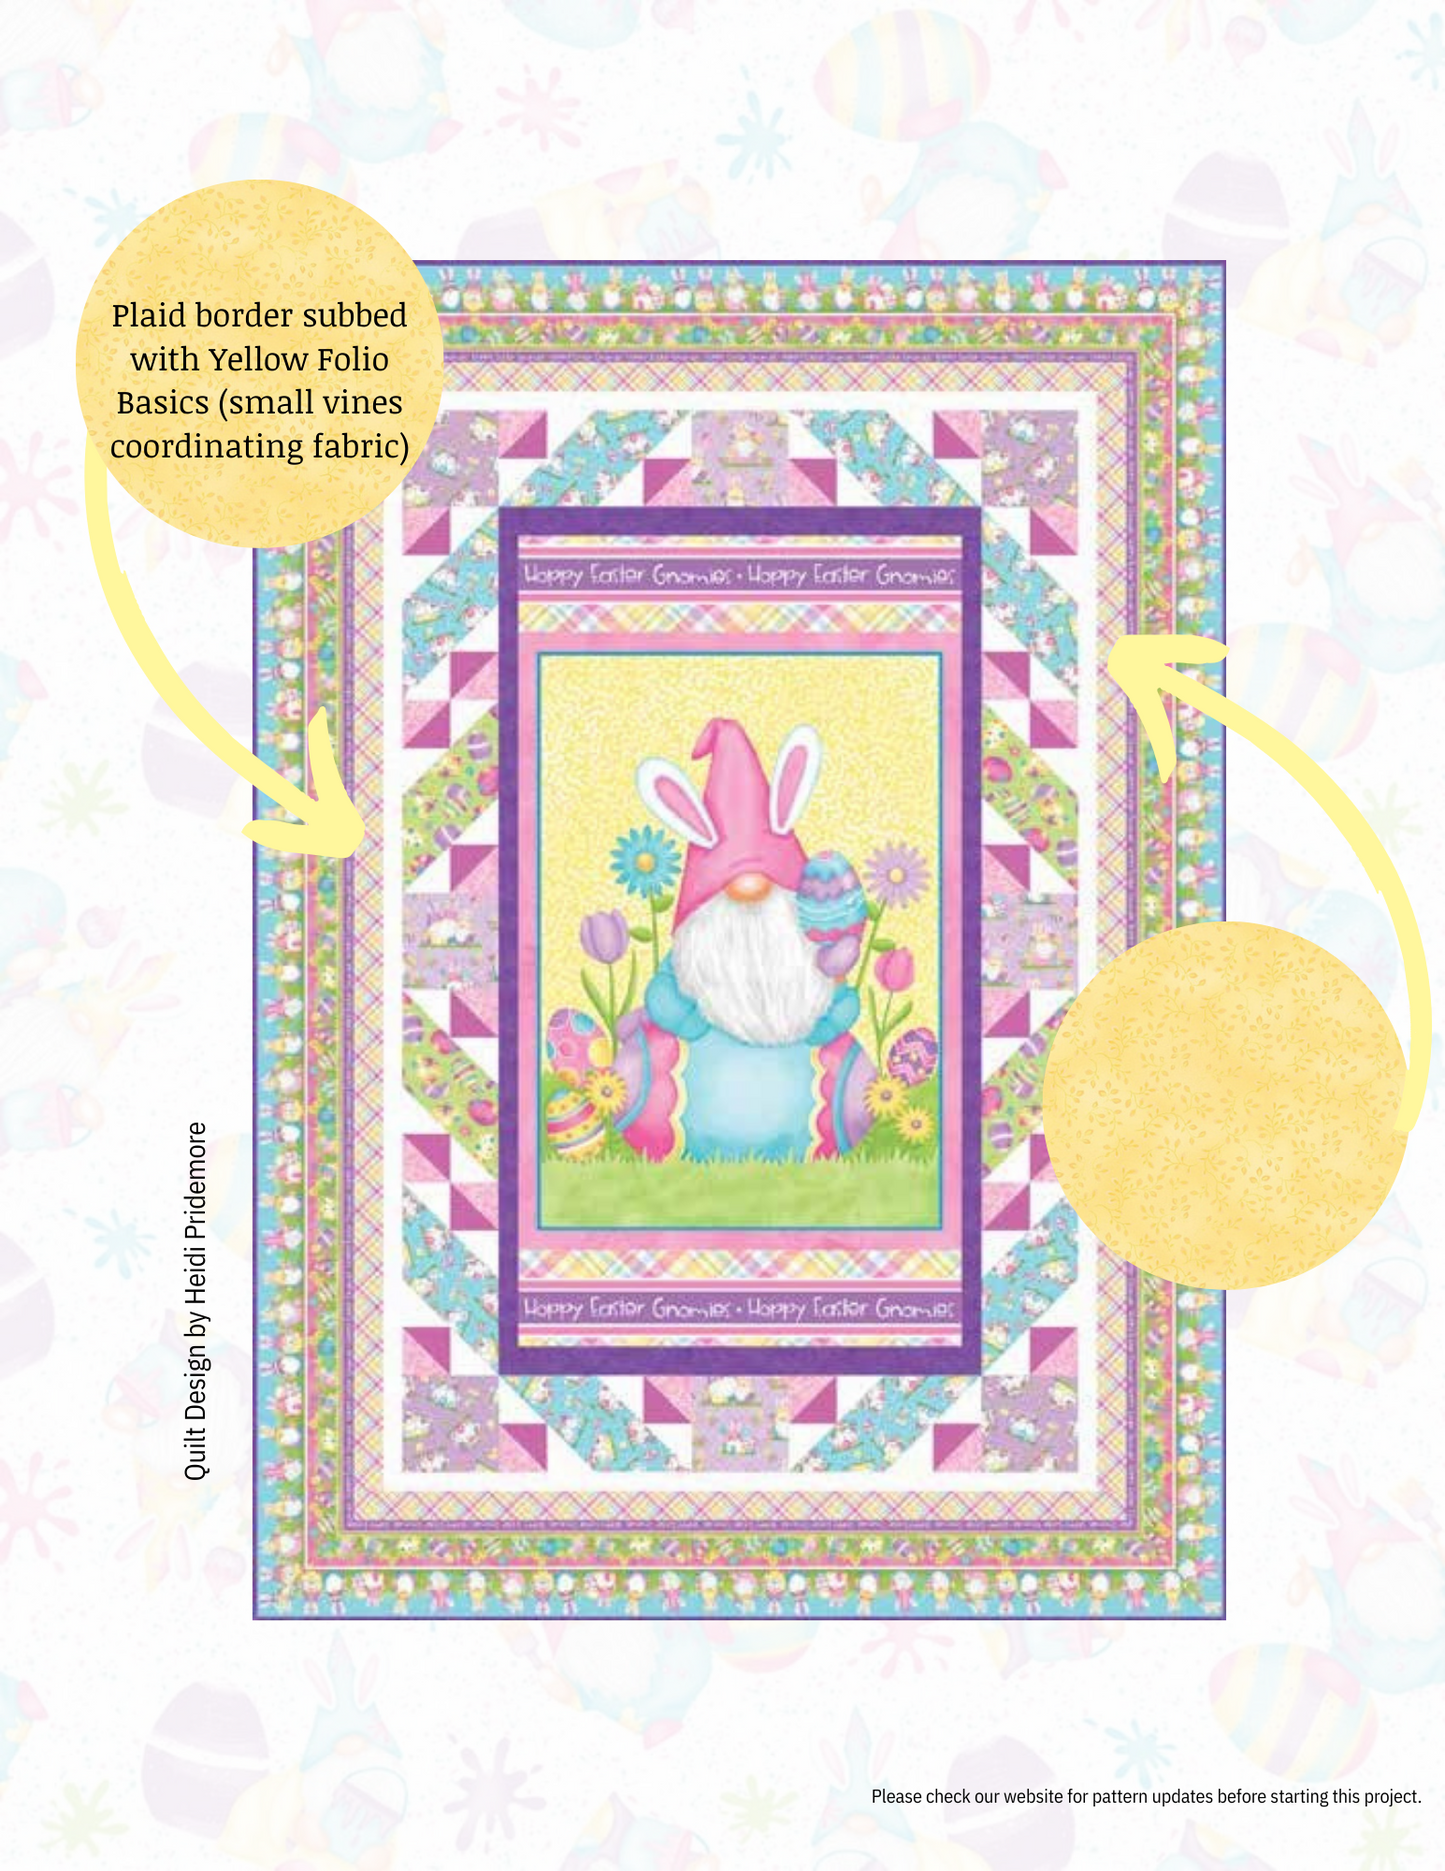 Hoppy Easter Gnomies Advanced Beginner QUILT KIT 1 with Henry Glass Easter Gnome Fabric 50"x70"